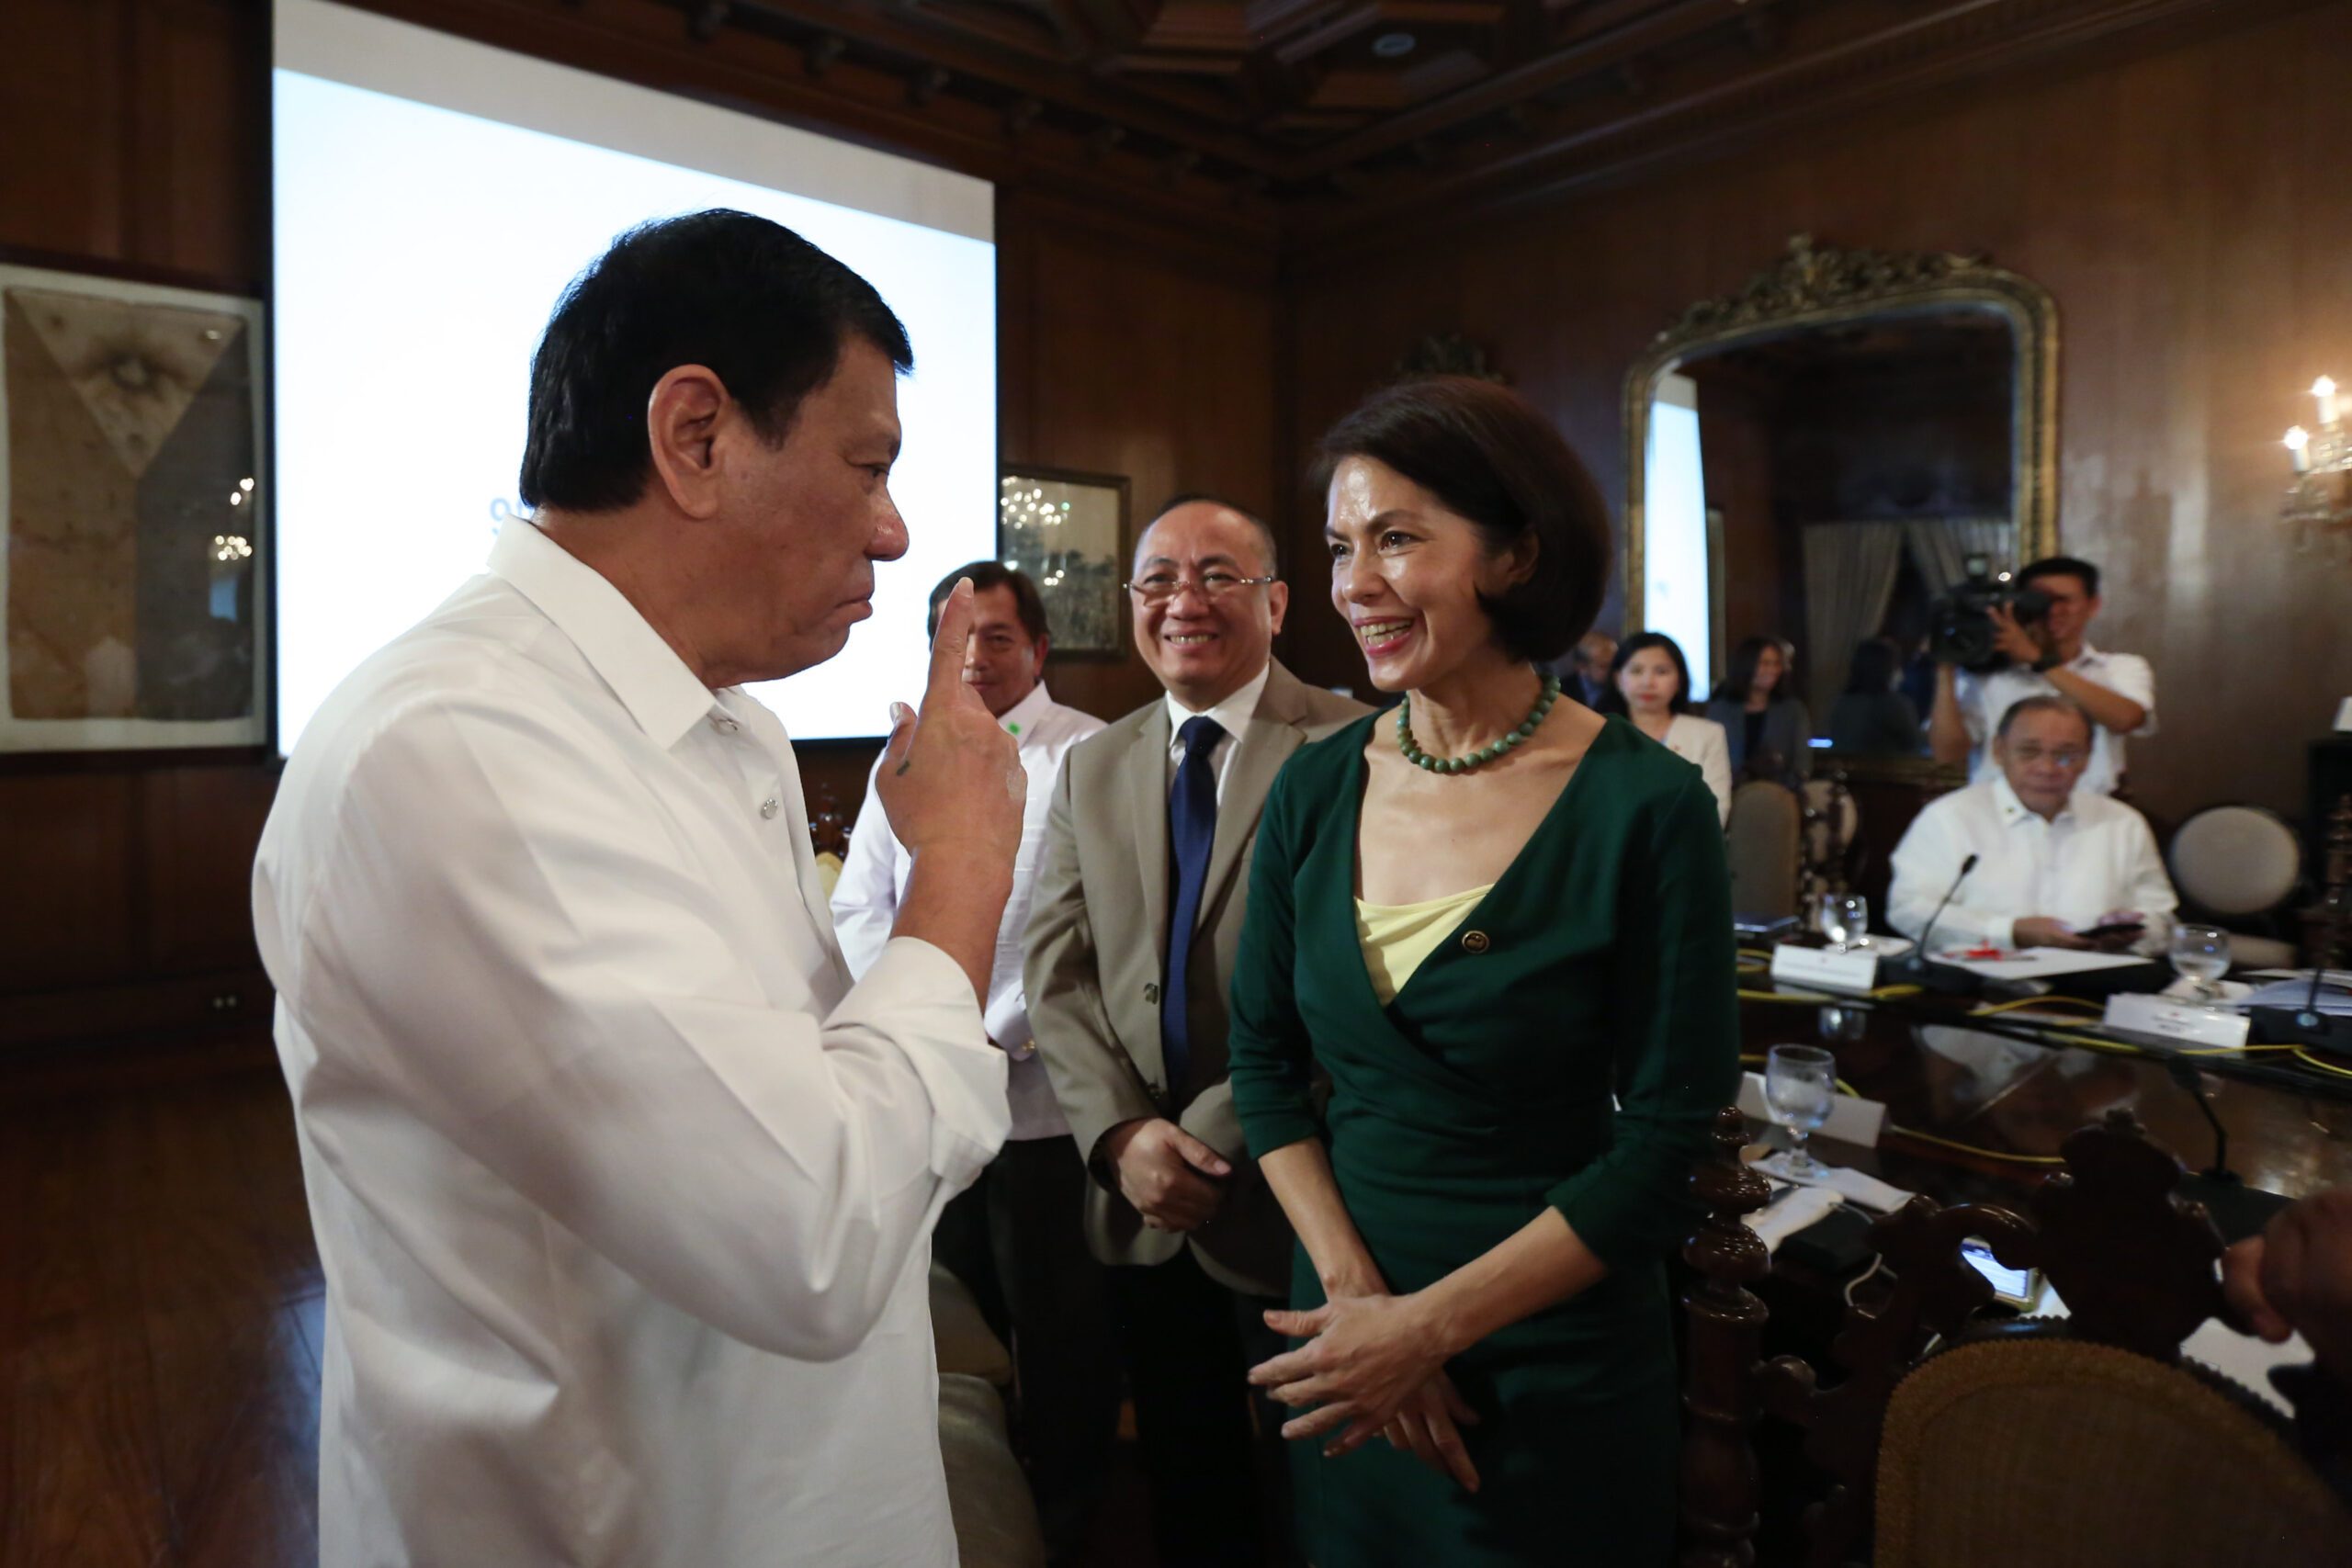 Trillanes: ‘Duterte fed Gina Lopez to the lions’